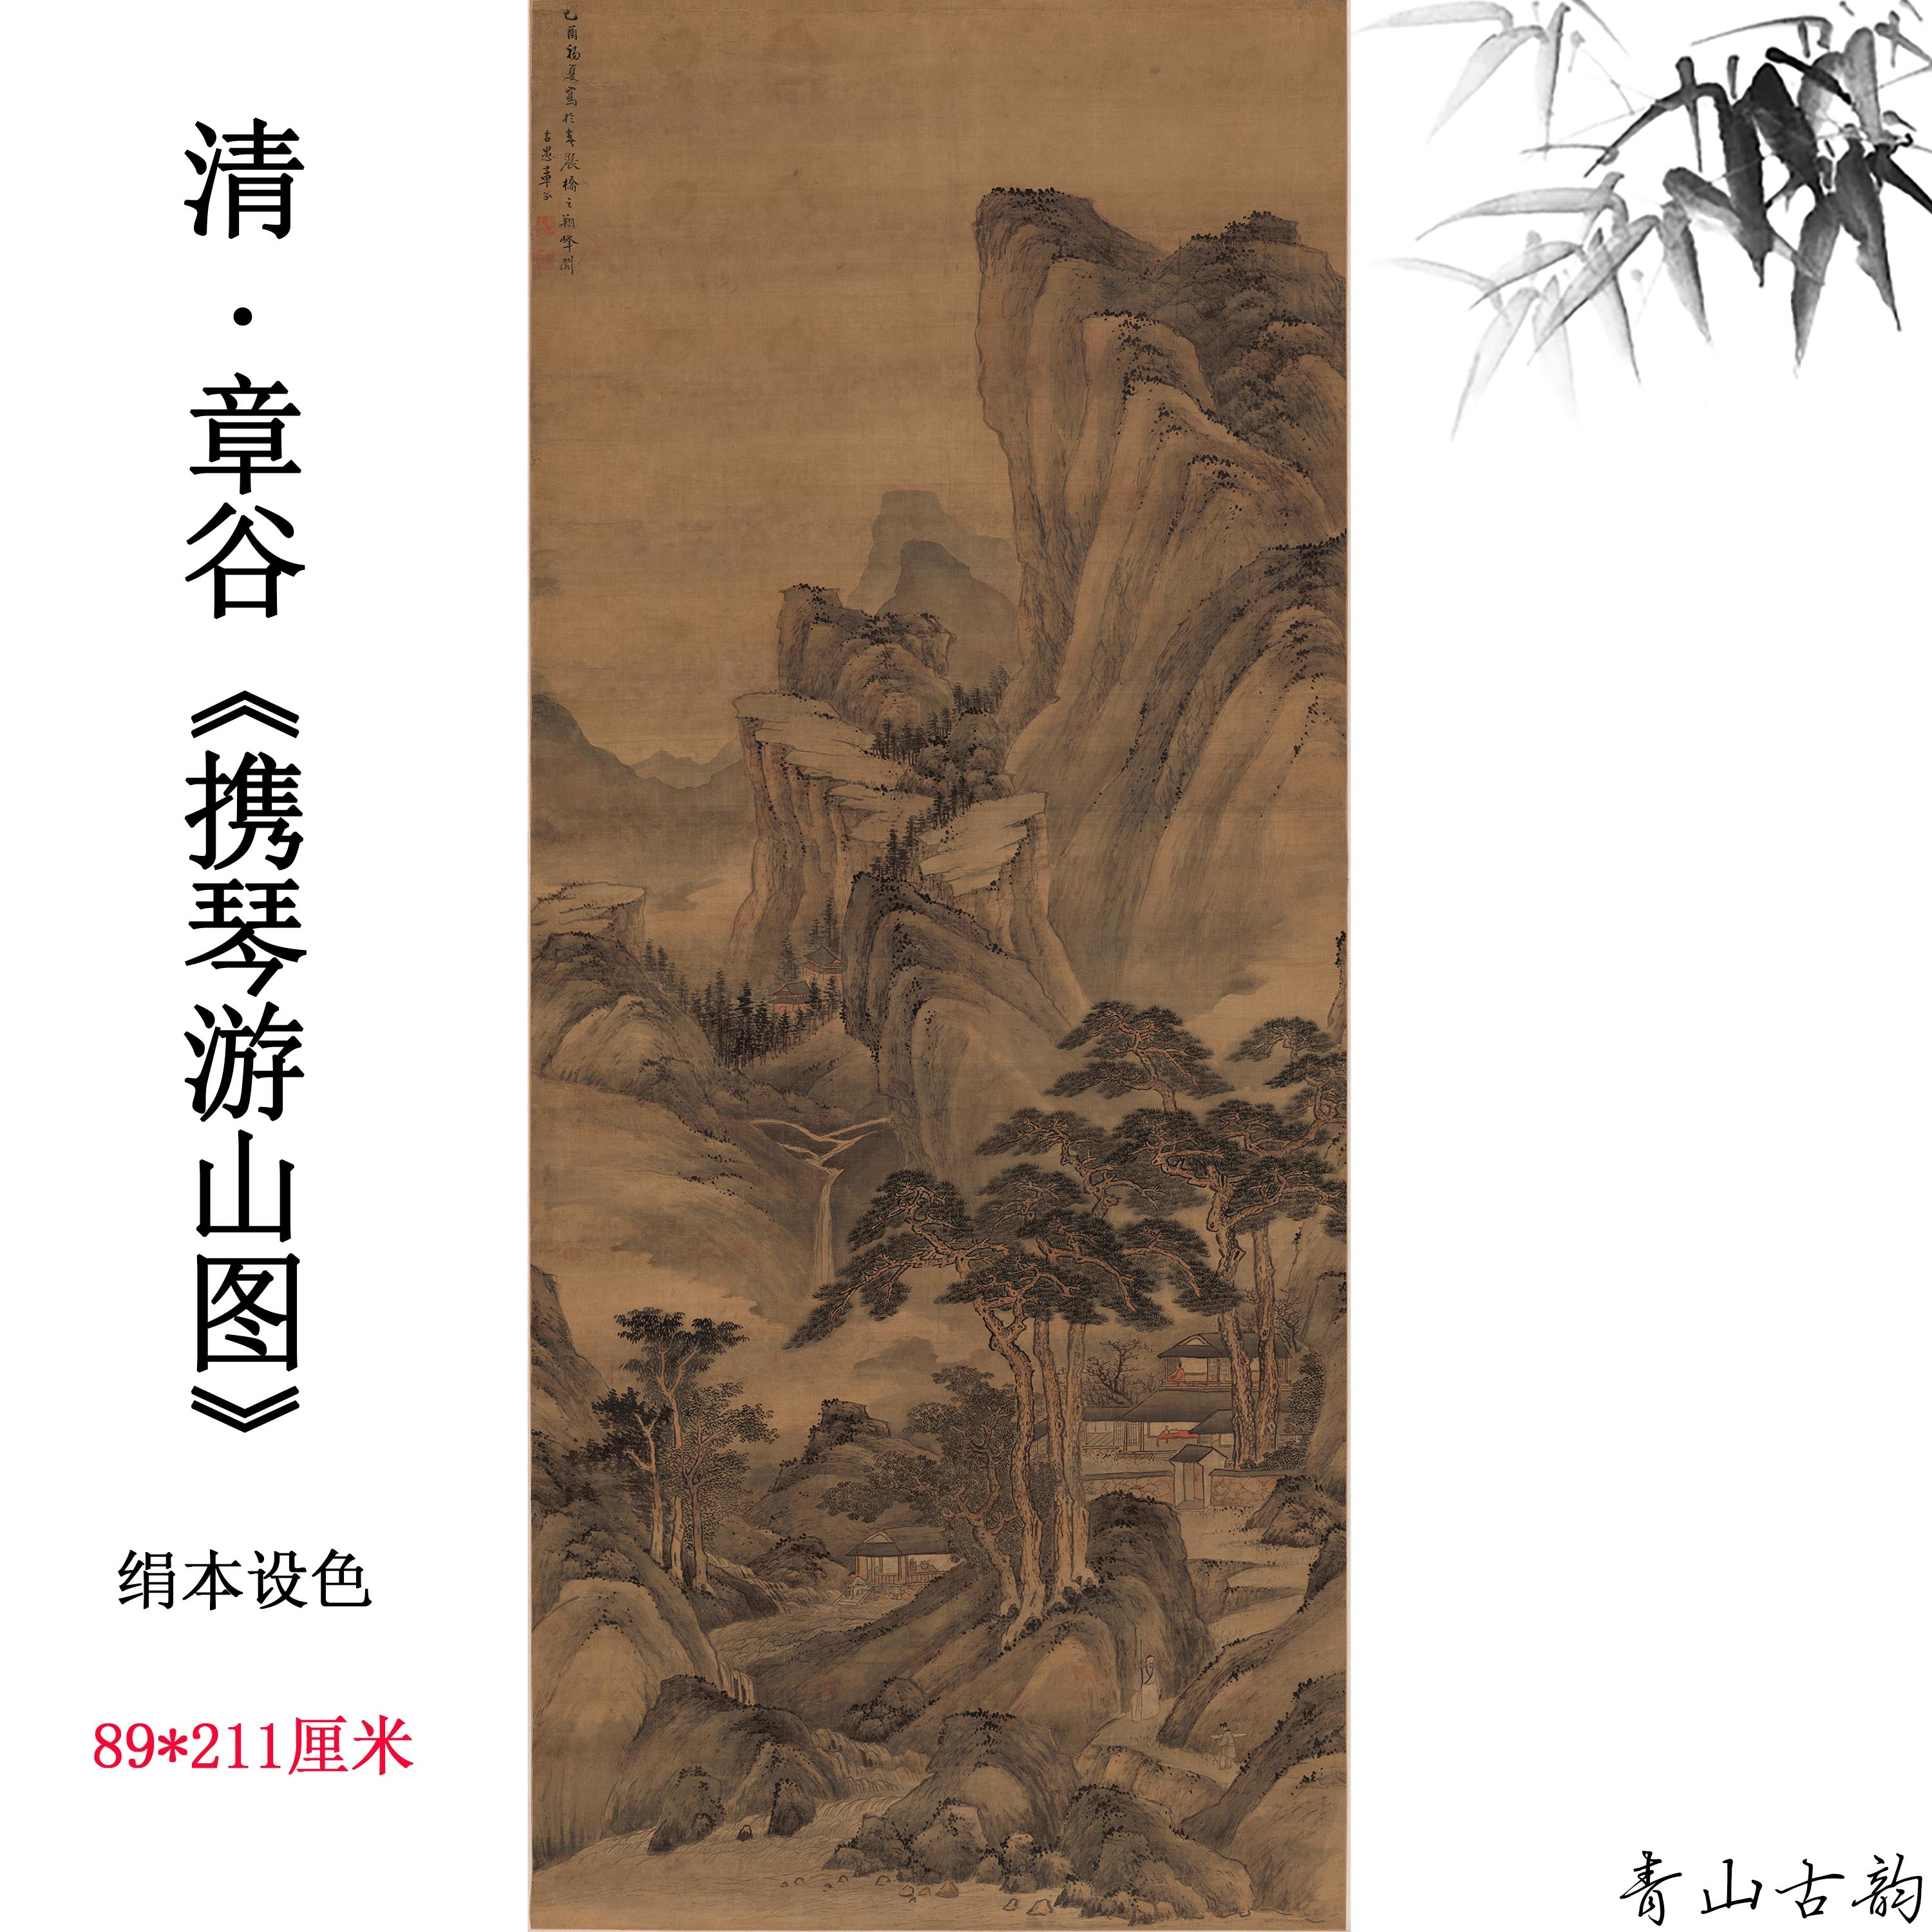 Chinese Antique Art Painting 清 章谷 携琴游山图 Qing Zhang Gu Xie Qin You Shan China Ancient Wall Picture Ideas 2583-Chinese Style Finds™